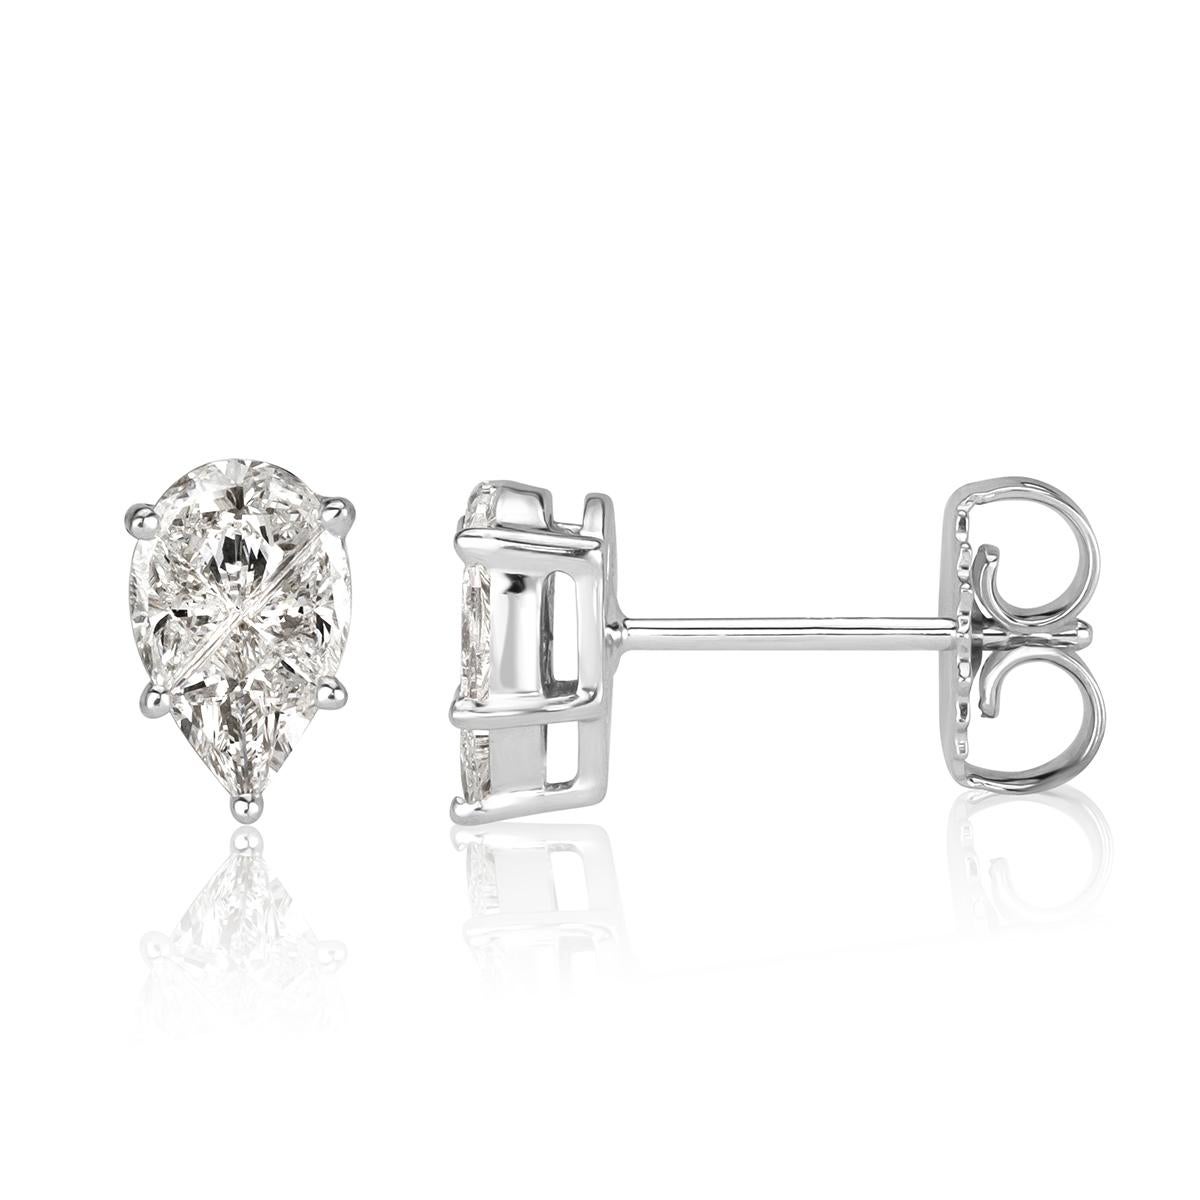 Created in 18k white gold, this ravishing pair of diamond stud earrings showcases 0.72ct of diamonds invisibly set in a lovely pear shaped design. They are graded at top qualities of E-F in color, VS1-VS2 in clarity.
